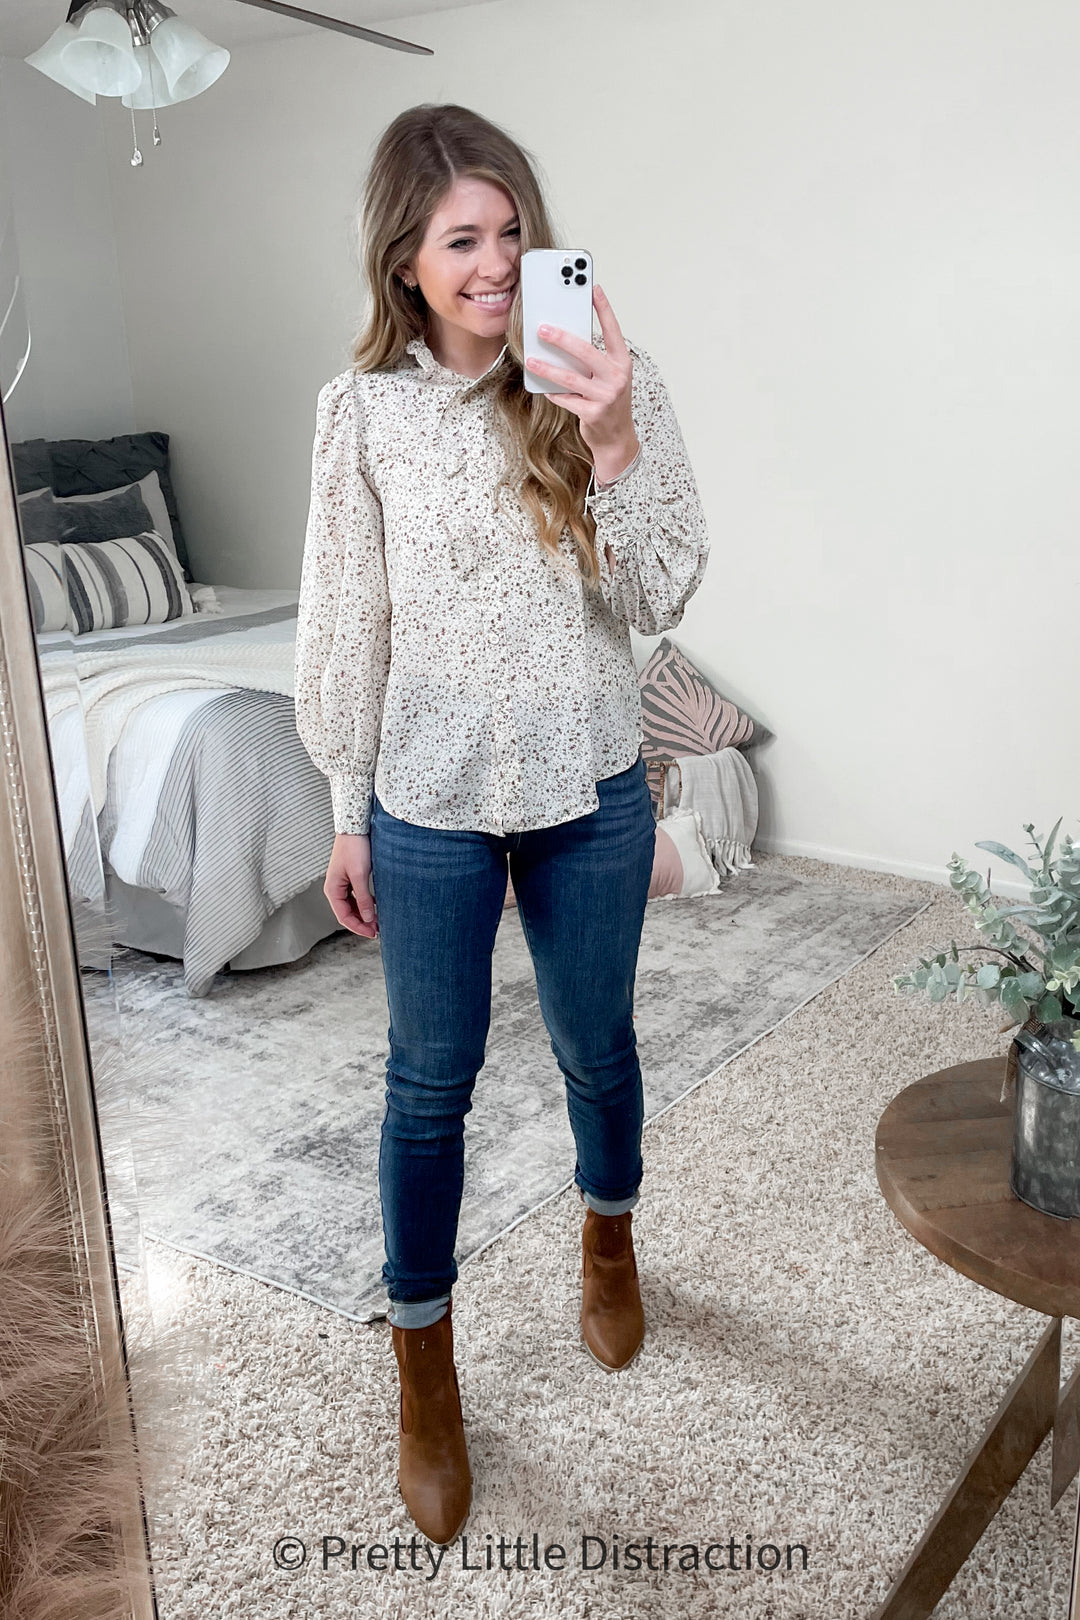 Floral Frill Blouse